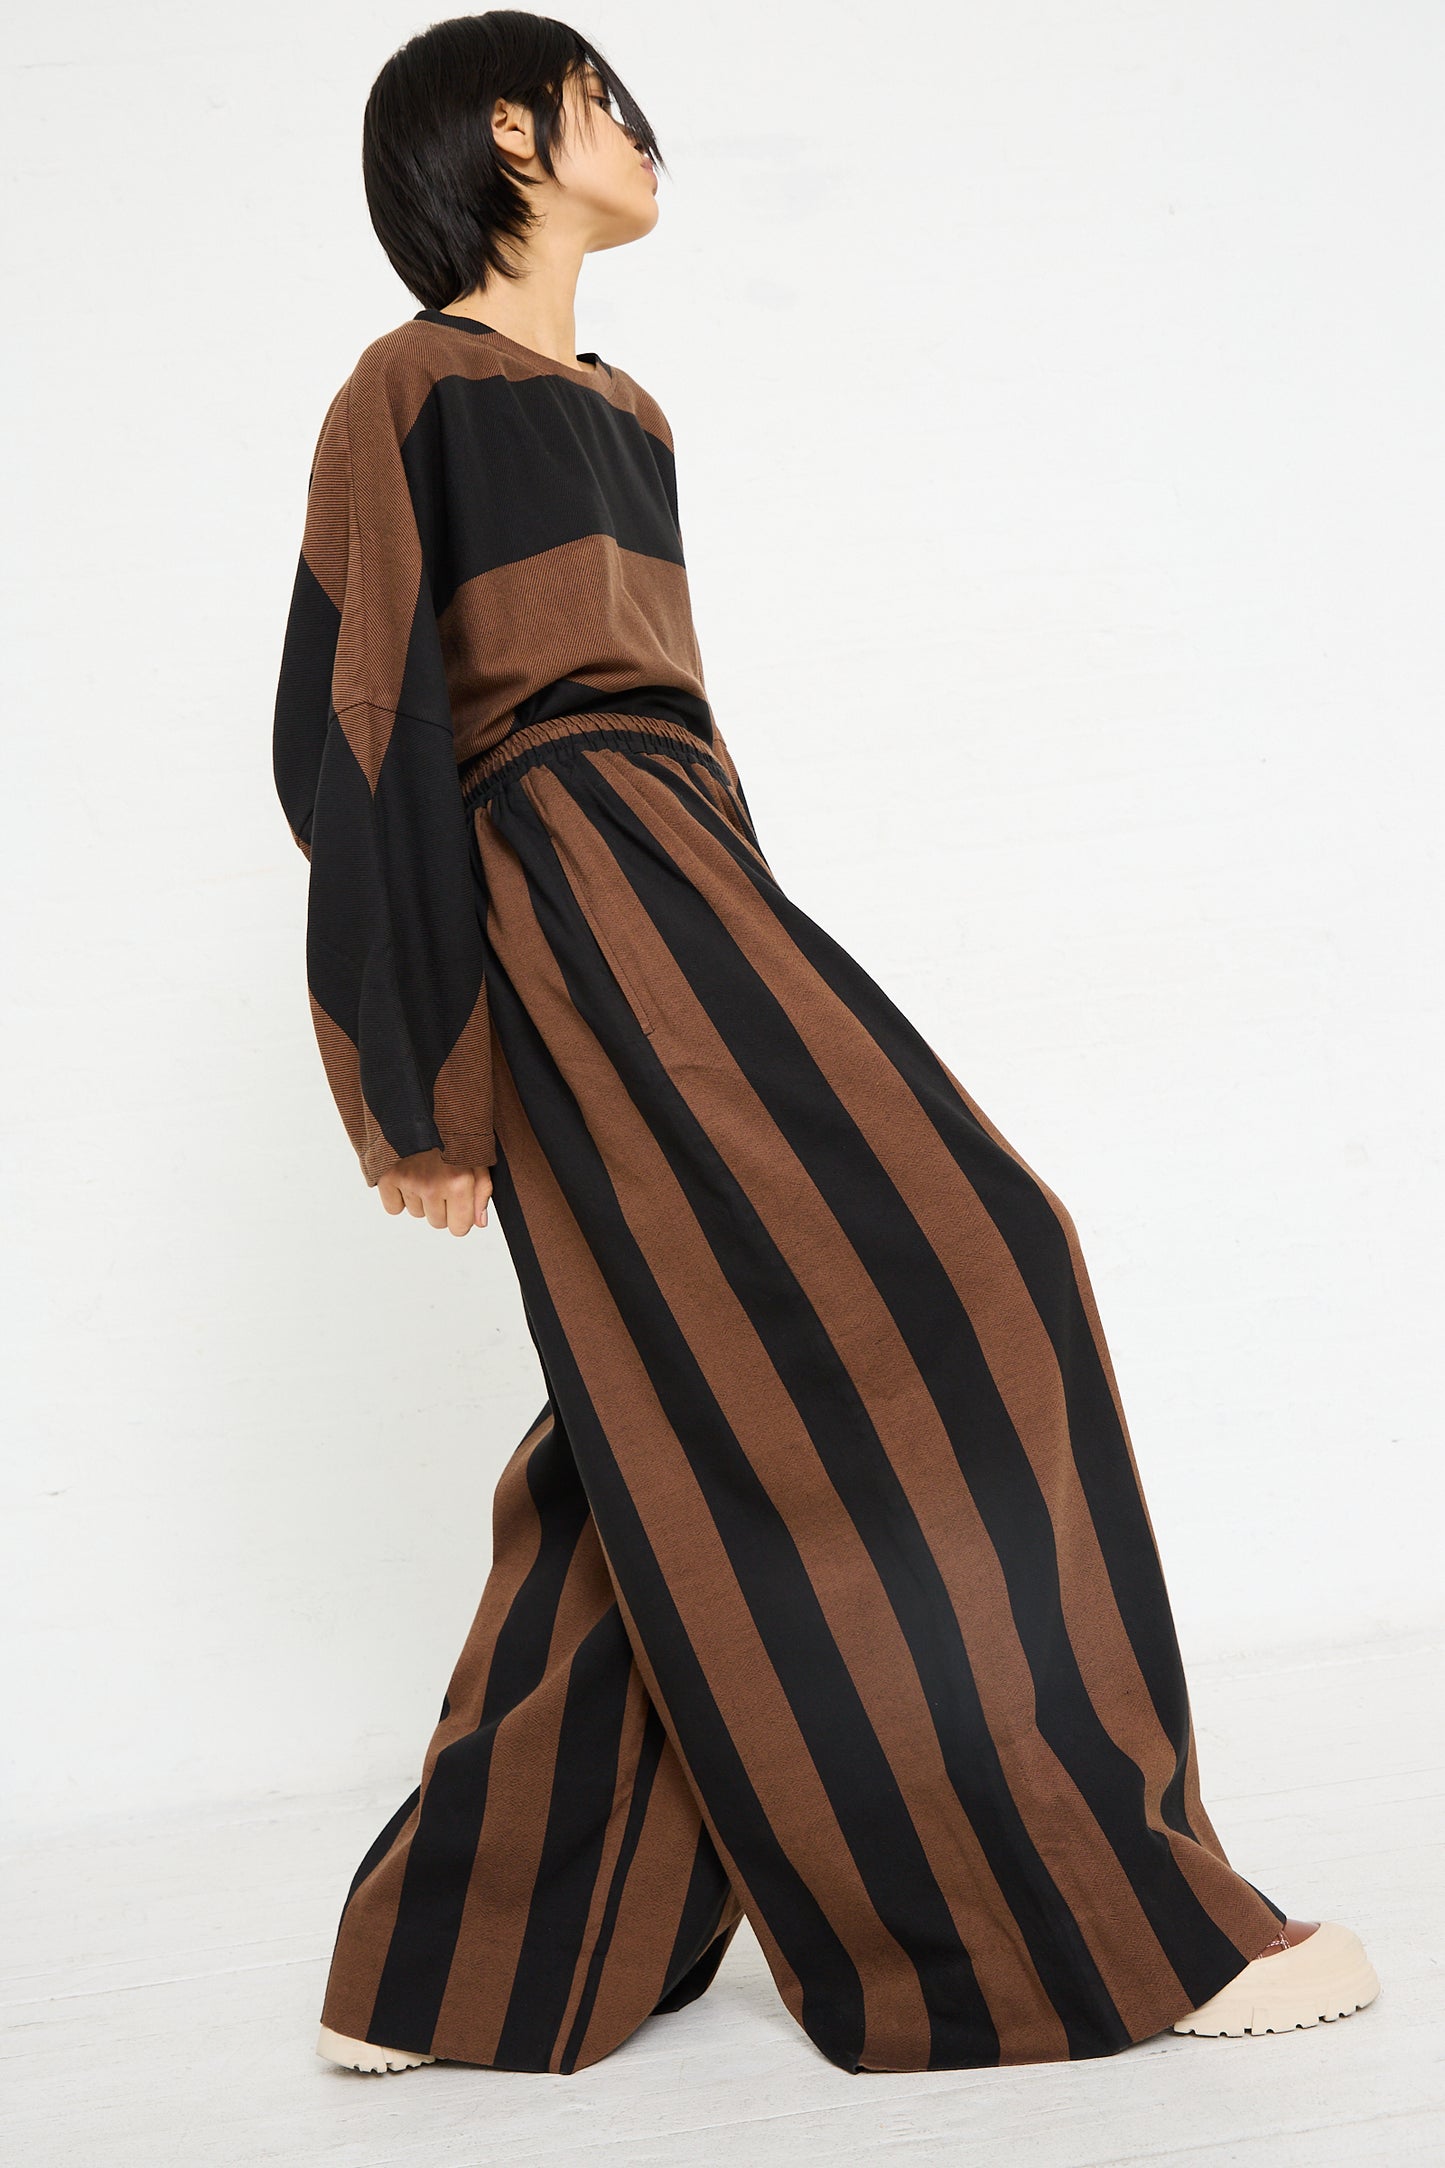 Woman modeling a Marrakshi Life Drawstring Pleated Pant in Black and Brown Stripe with a drawstring closure, and a loose-fitting top.